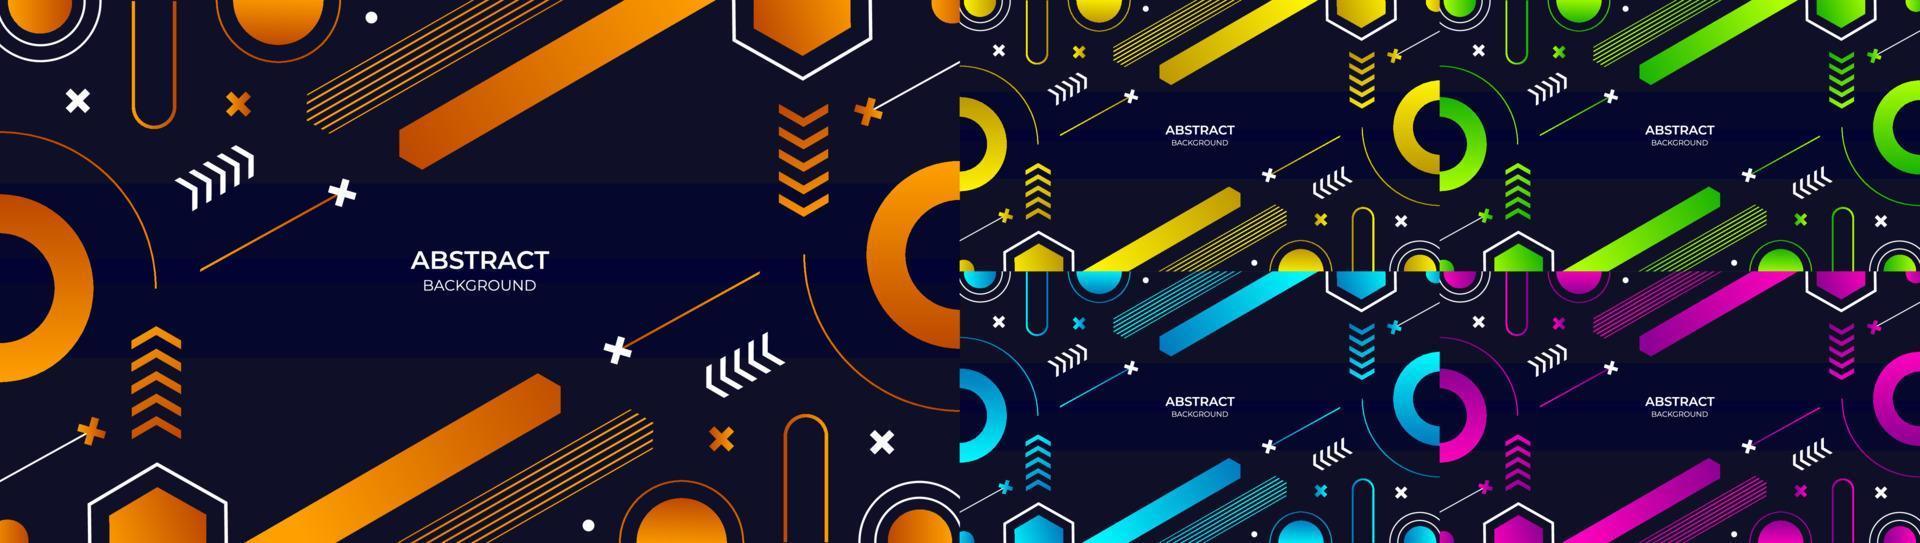 Abstract geometric modern object colorful gradient orange, yellow, green, blue and purple background. Vector illustration